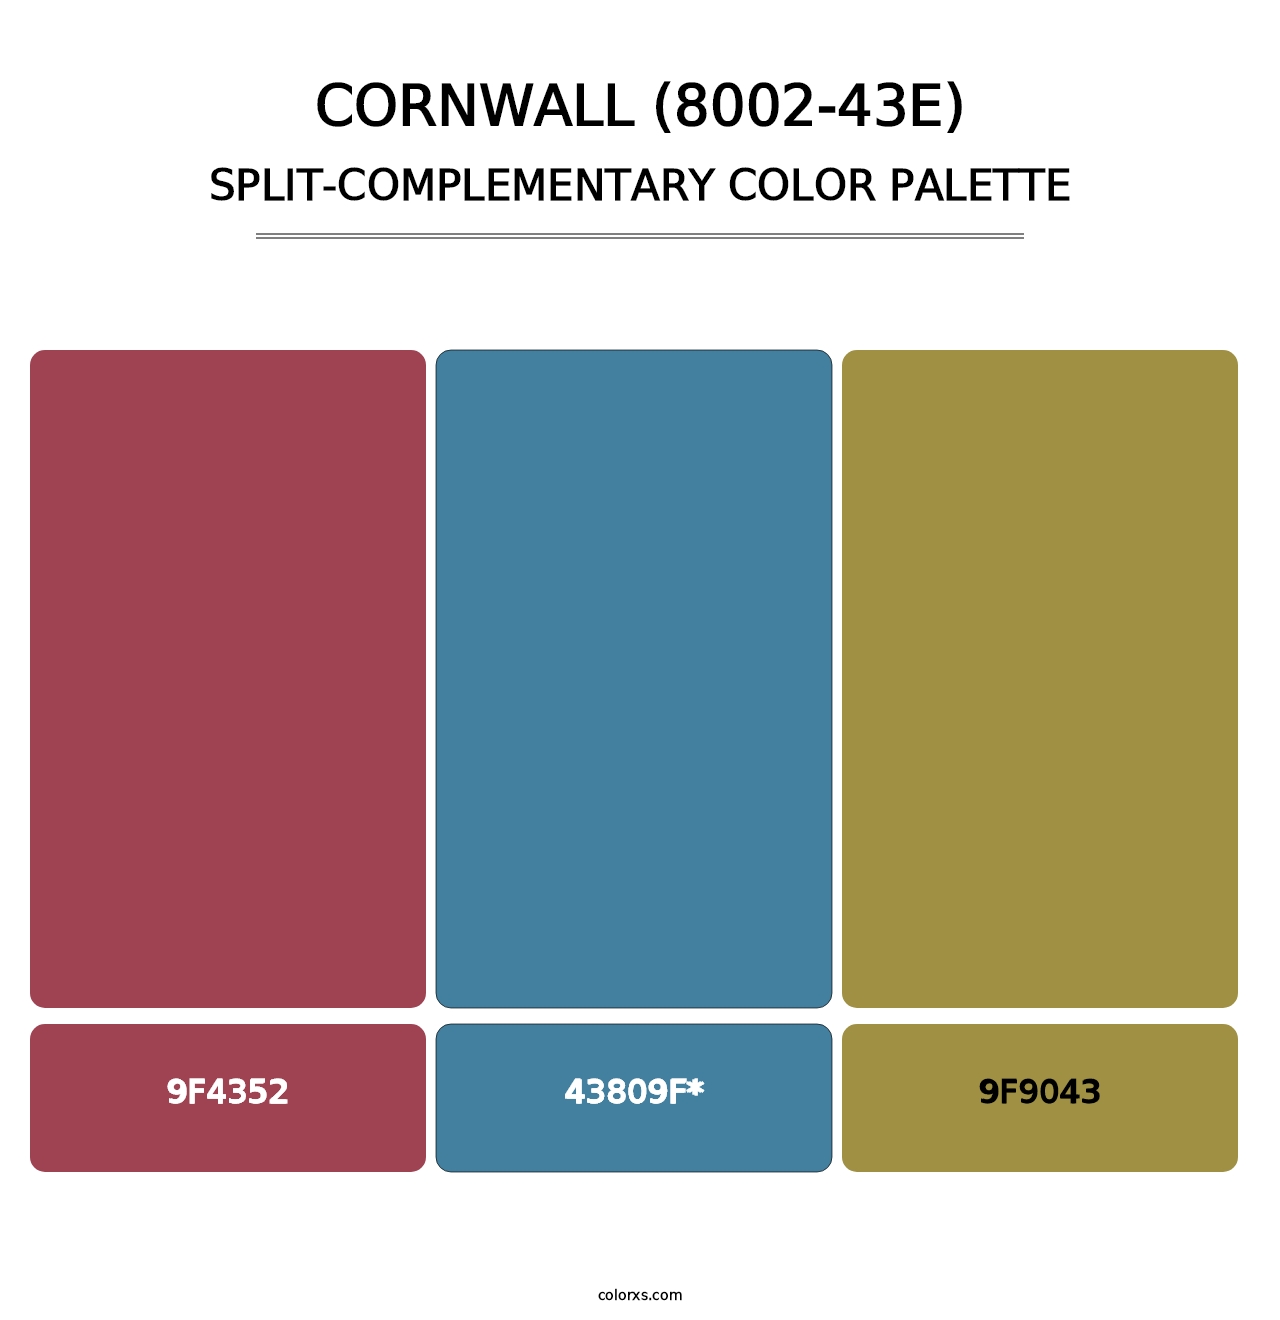 Cornwall (8002-43E) - Split-Complementary Color Palette